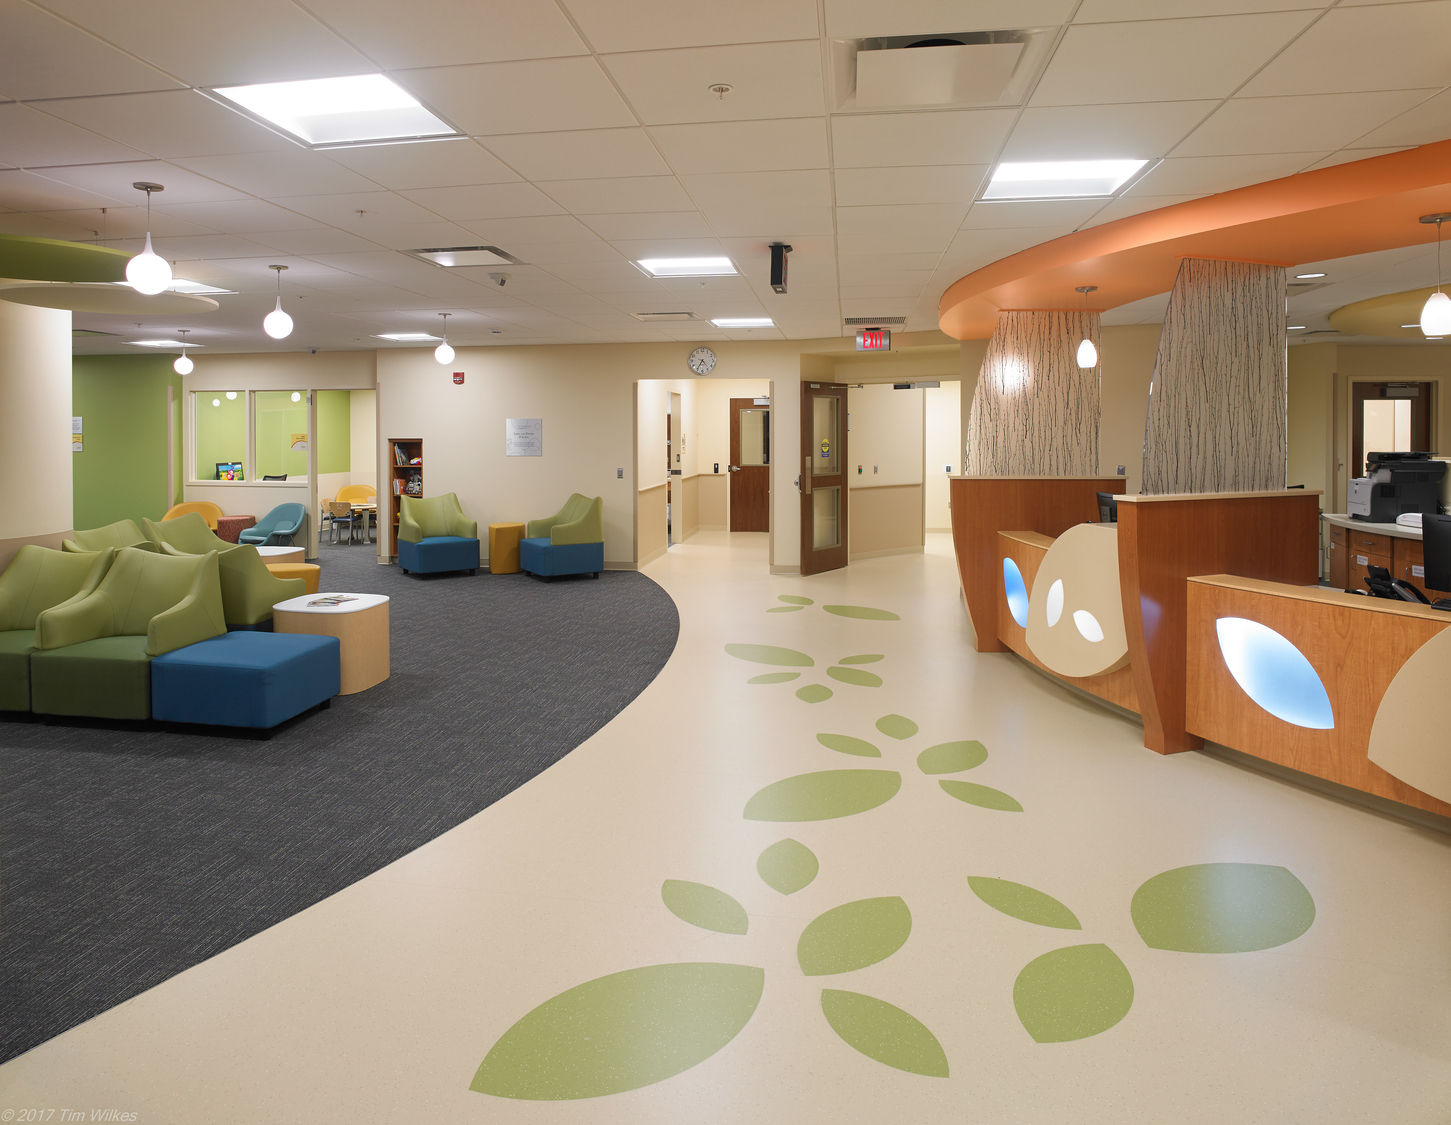 Image shows a fun lobby design that has leaves on the walkway, green comfortable seating, and desks for people to speak to the receptionist. This space is The University of Rochester Medical Center’s (URMC) Levine Autism Clinic.